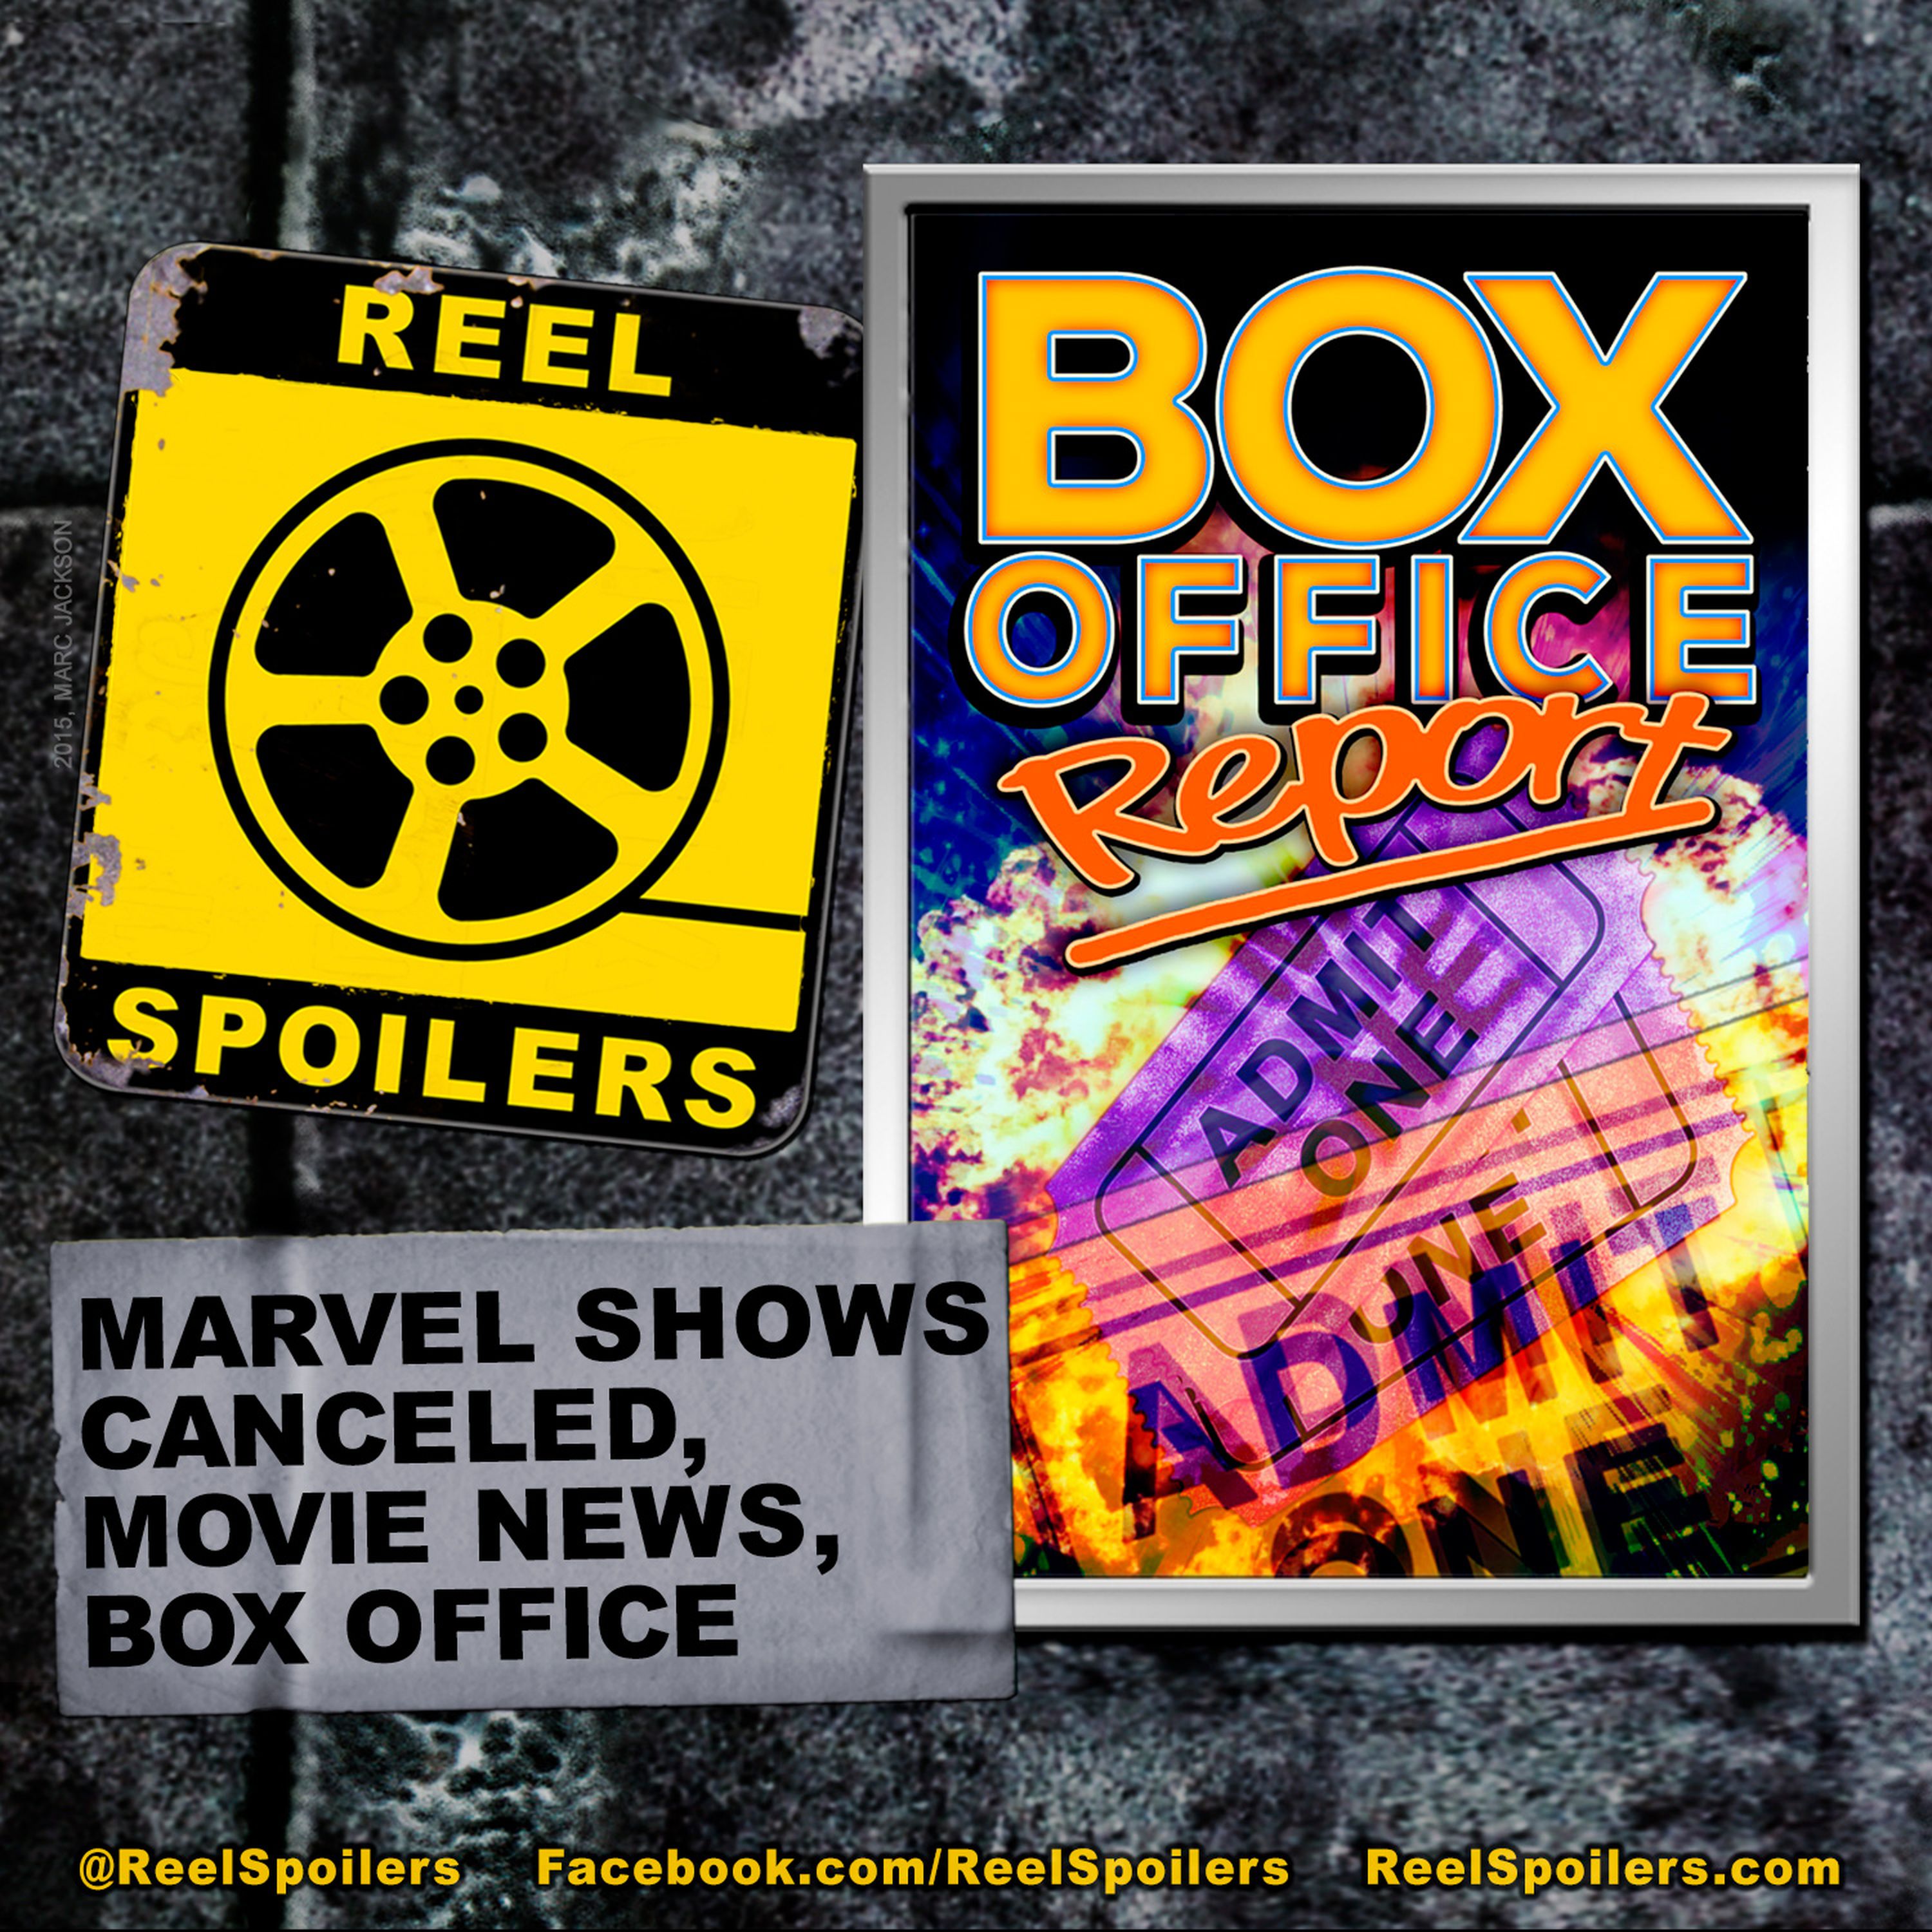 Marvel Shows Canceled, Movie News, and Box Office Image